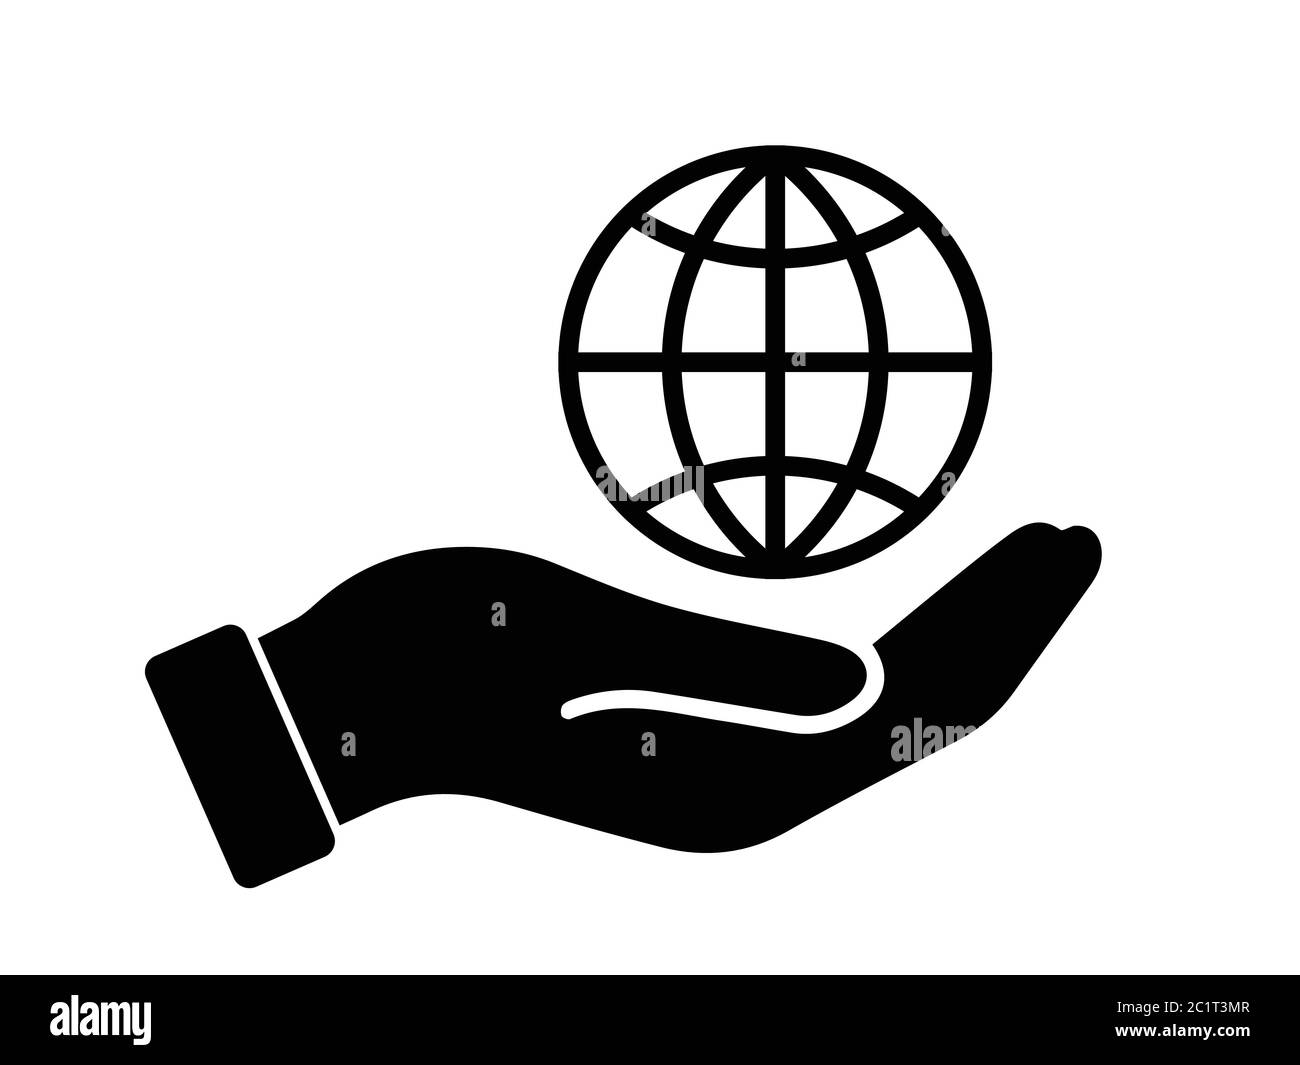 Palm Out Hand Holding Wire Globe Earth World Planet 3D Frame.Black Illustration Isolated on a White Background. EPS Vector Stock Vector